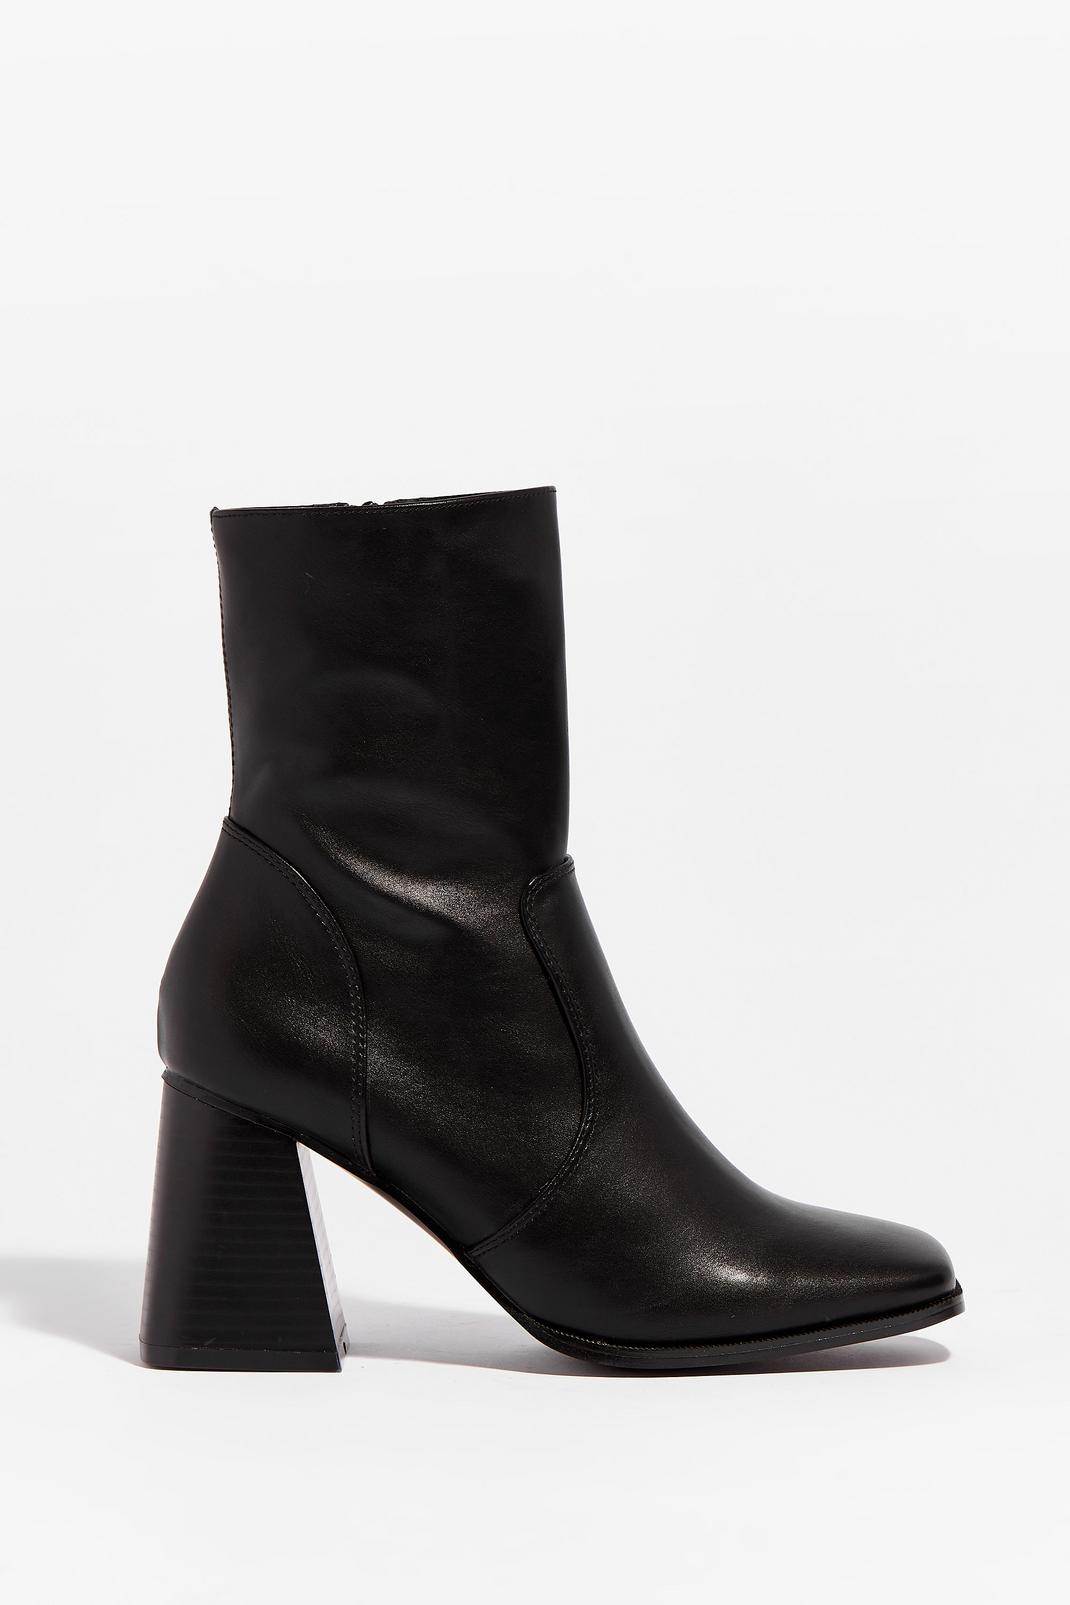 Black Faux Leather Block Heel Zip Up Boots image number 1